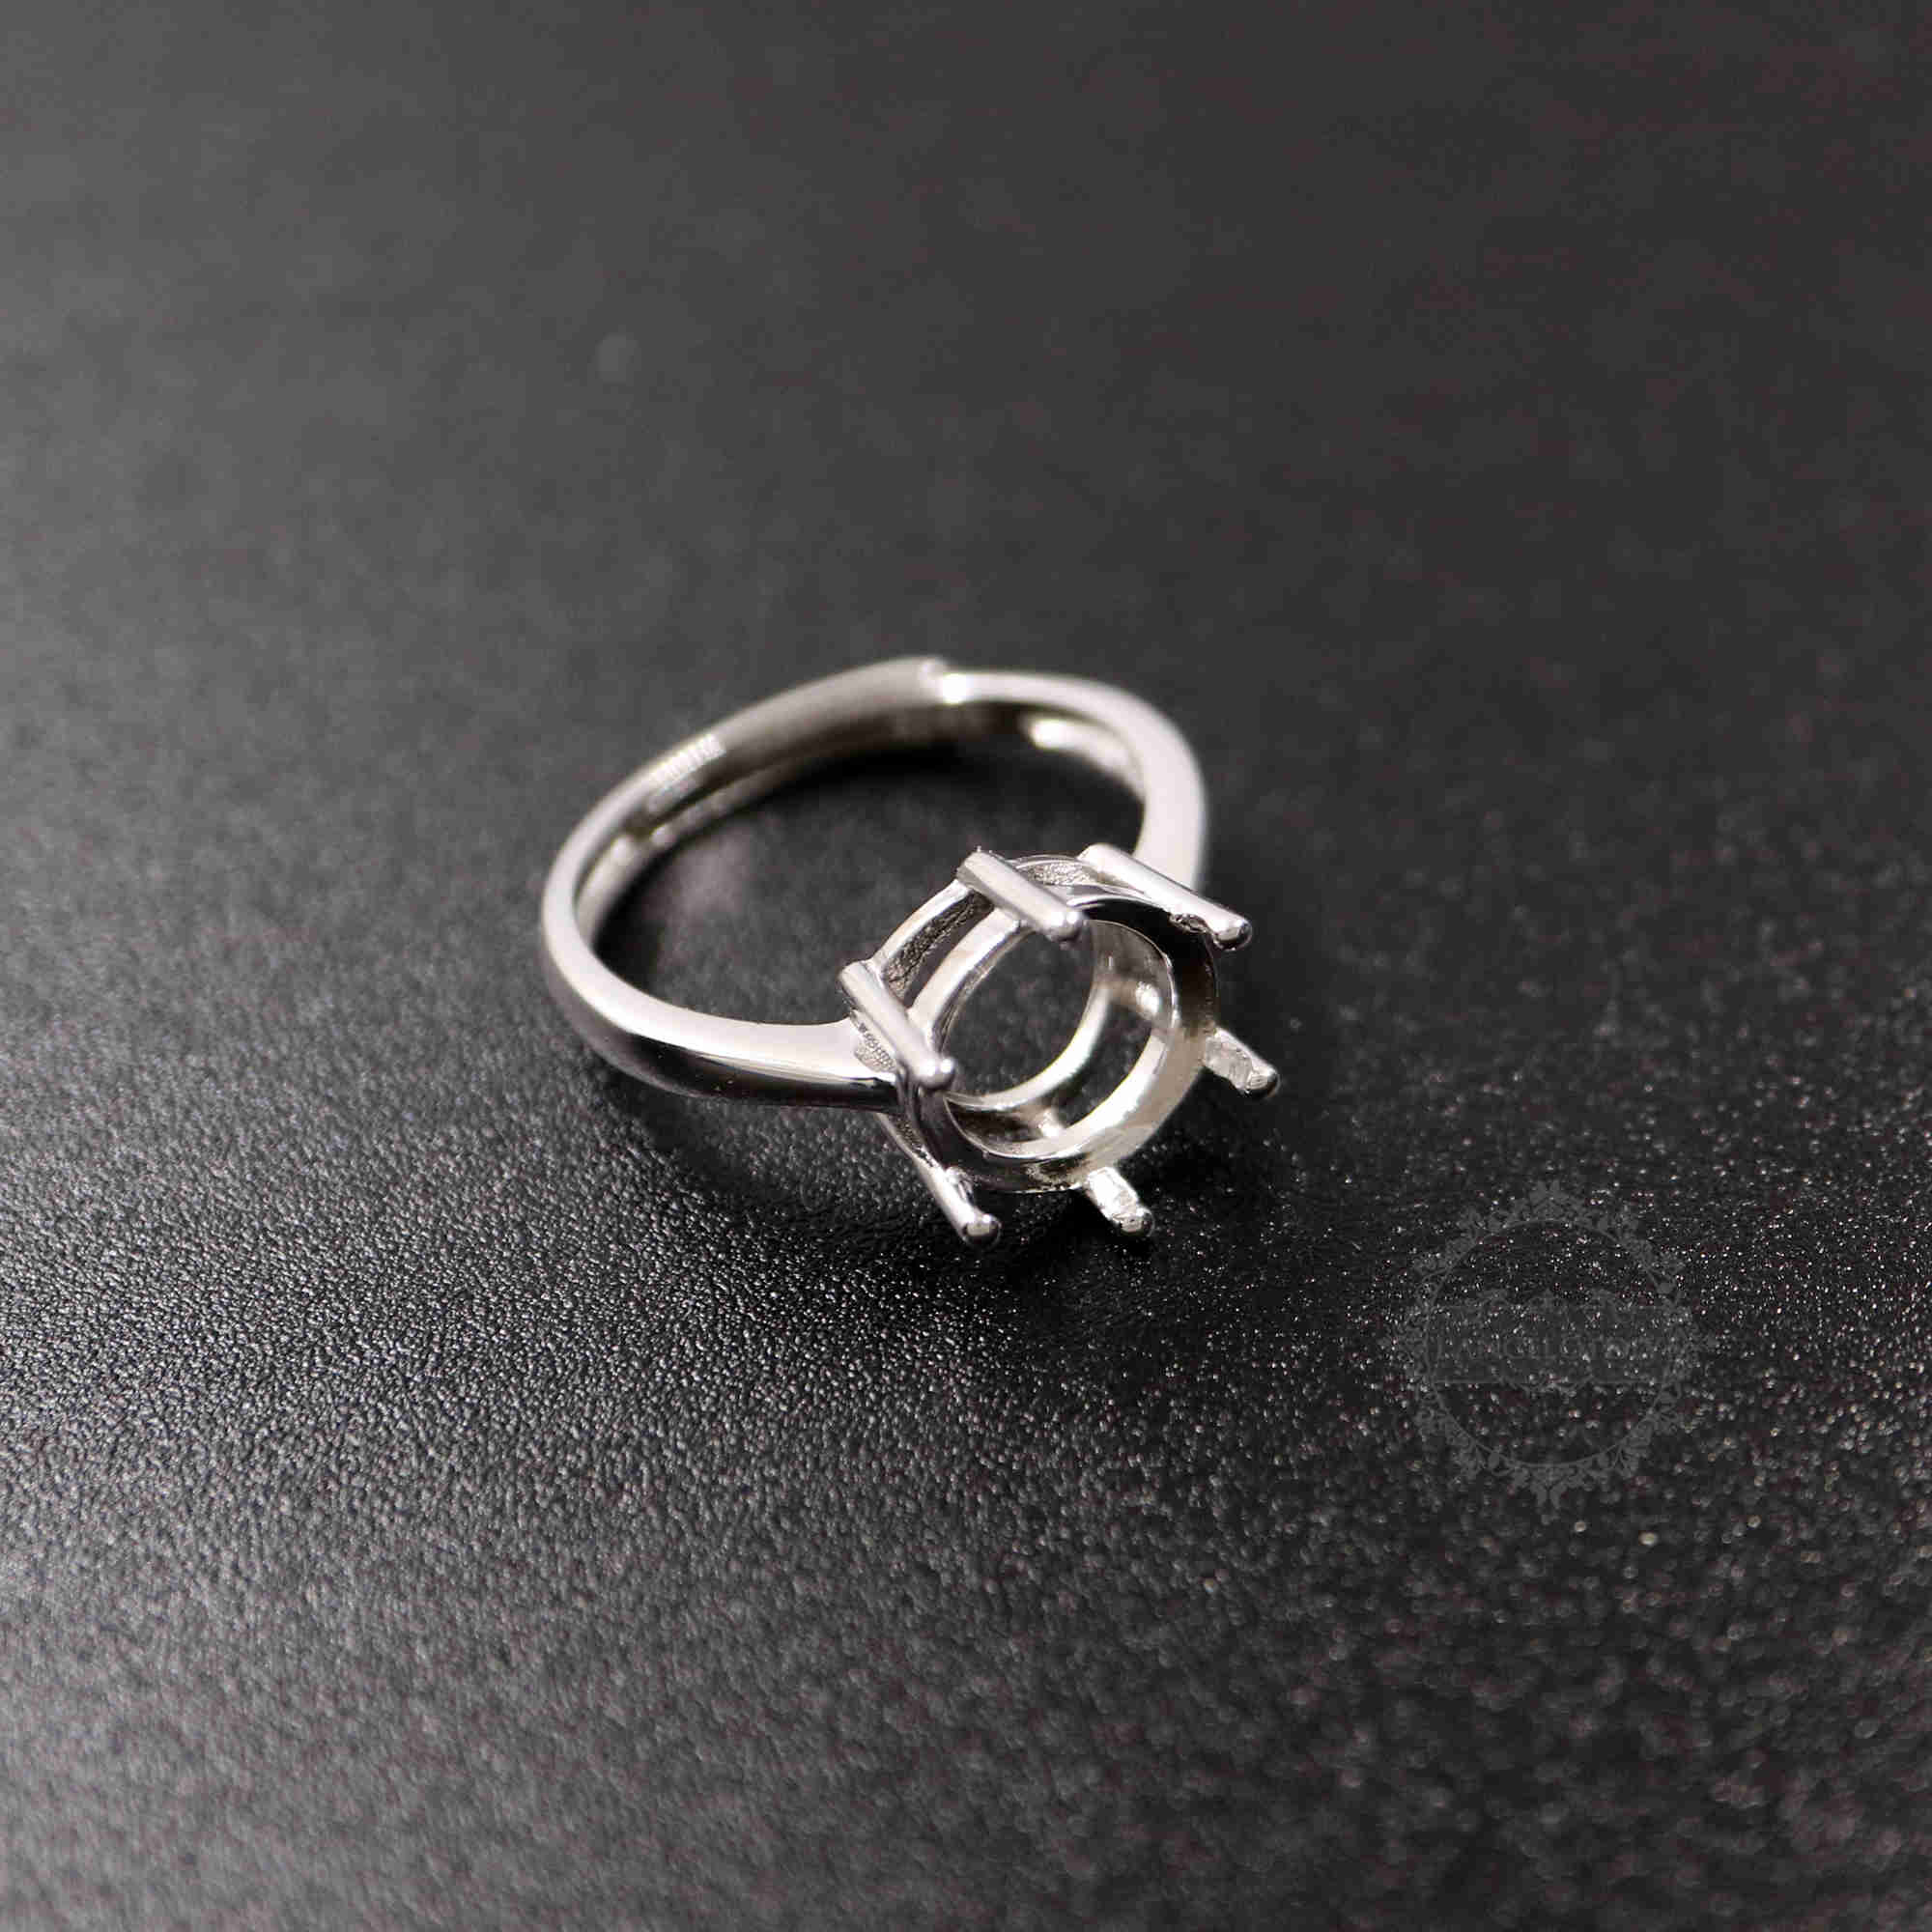 1Pcs 4-12MM Round Cz Stone Prong Setting 925 Sterling Silver Bezel Tray Adjustable Ring Settings 1212035 - Click Image to Close